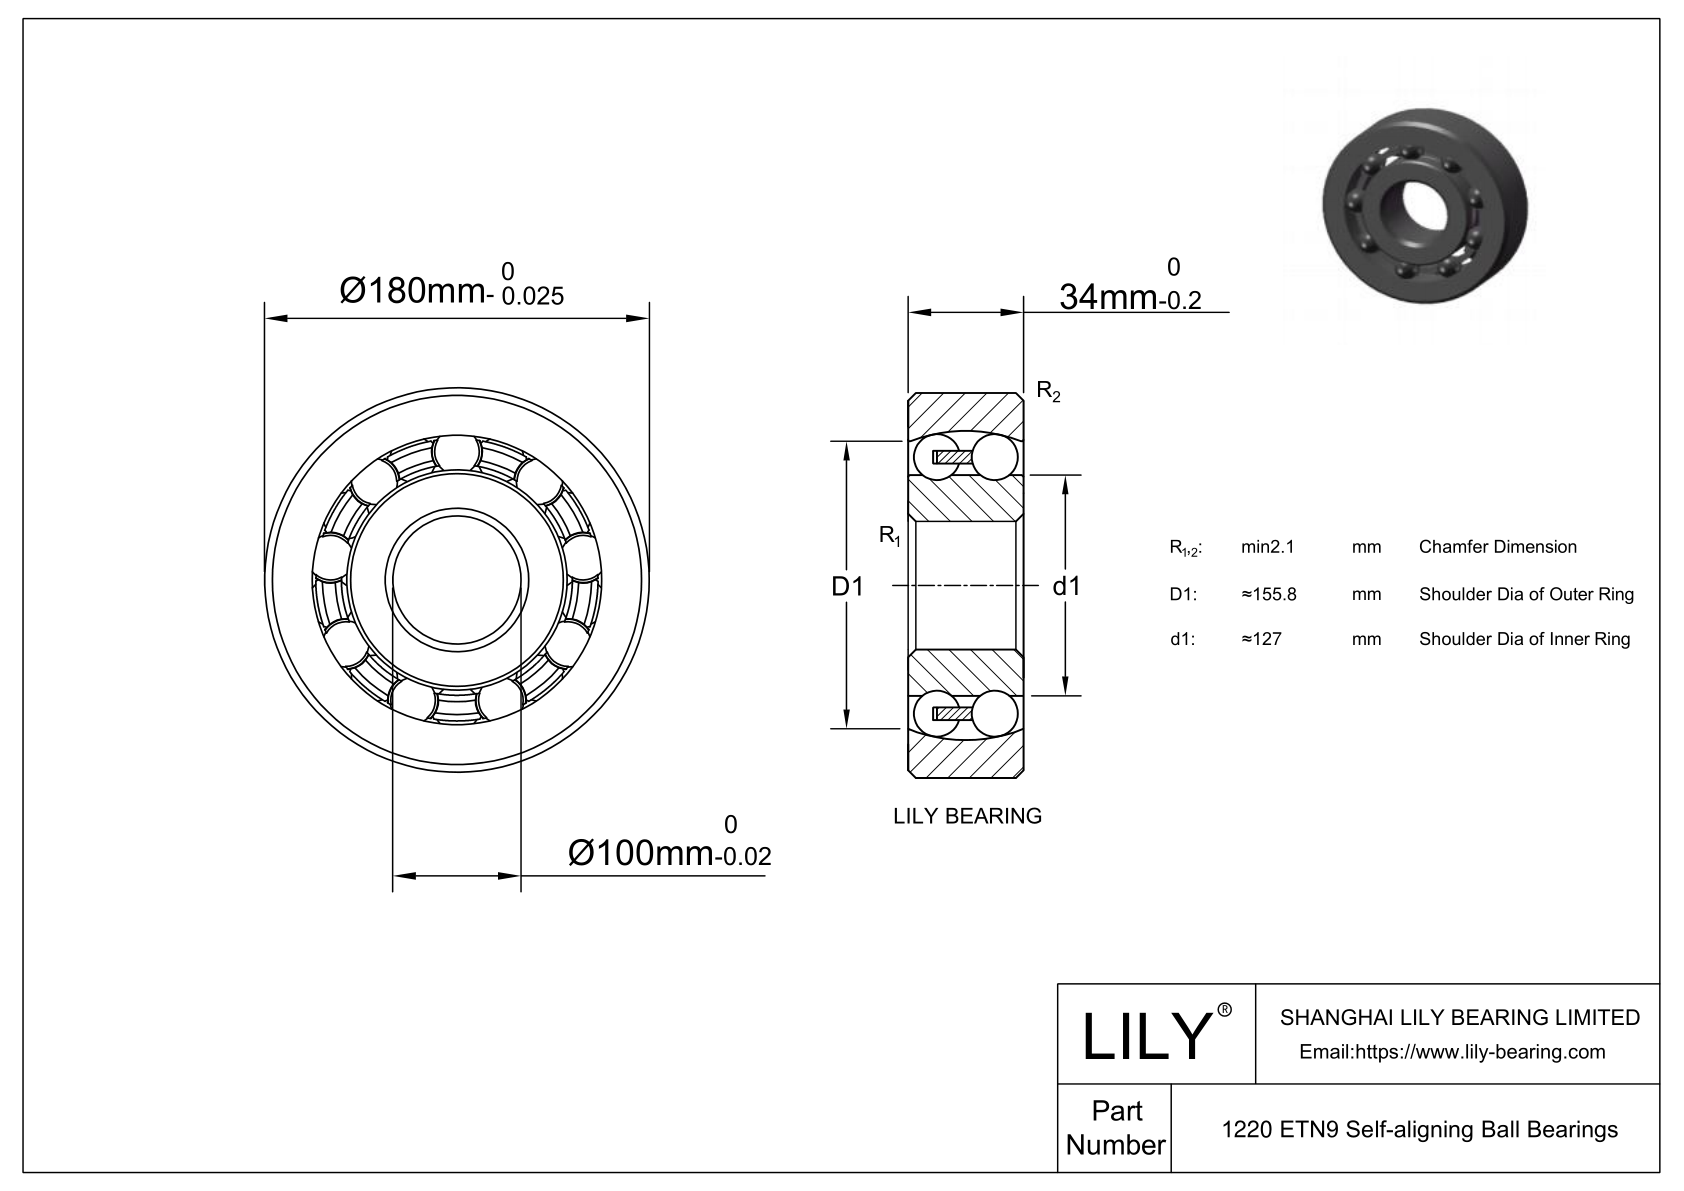 S1220 Stainless Steel Self Aligning Ball Bearings cad drawing